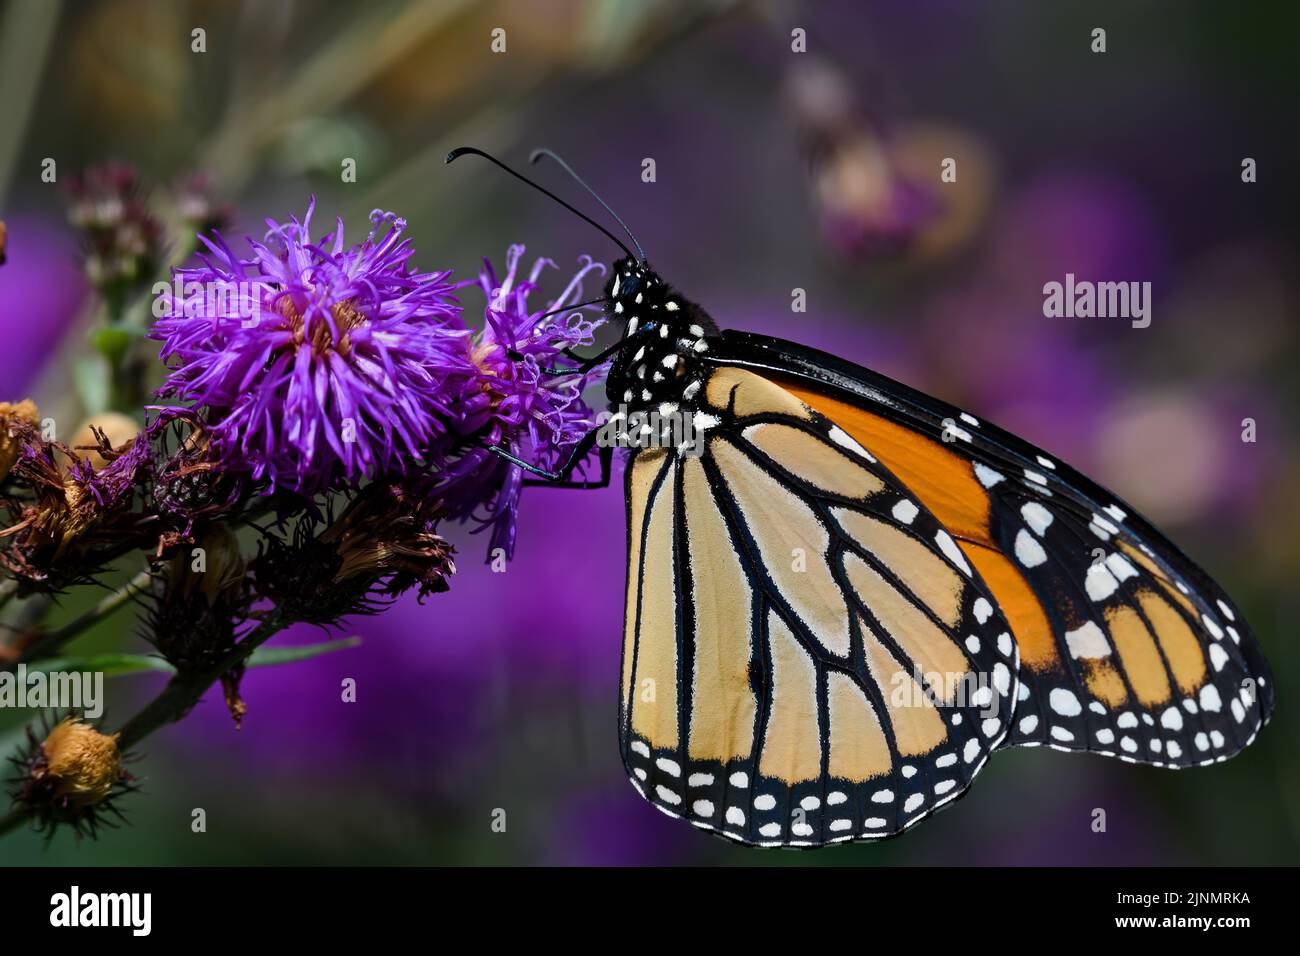 Monarch butterfly on ironweed an ecologically important plant that attracts bees and butterflies. Stock Photo